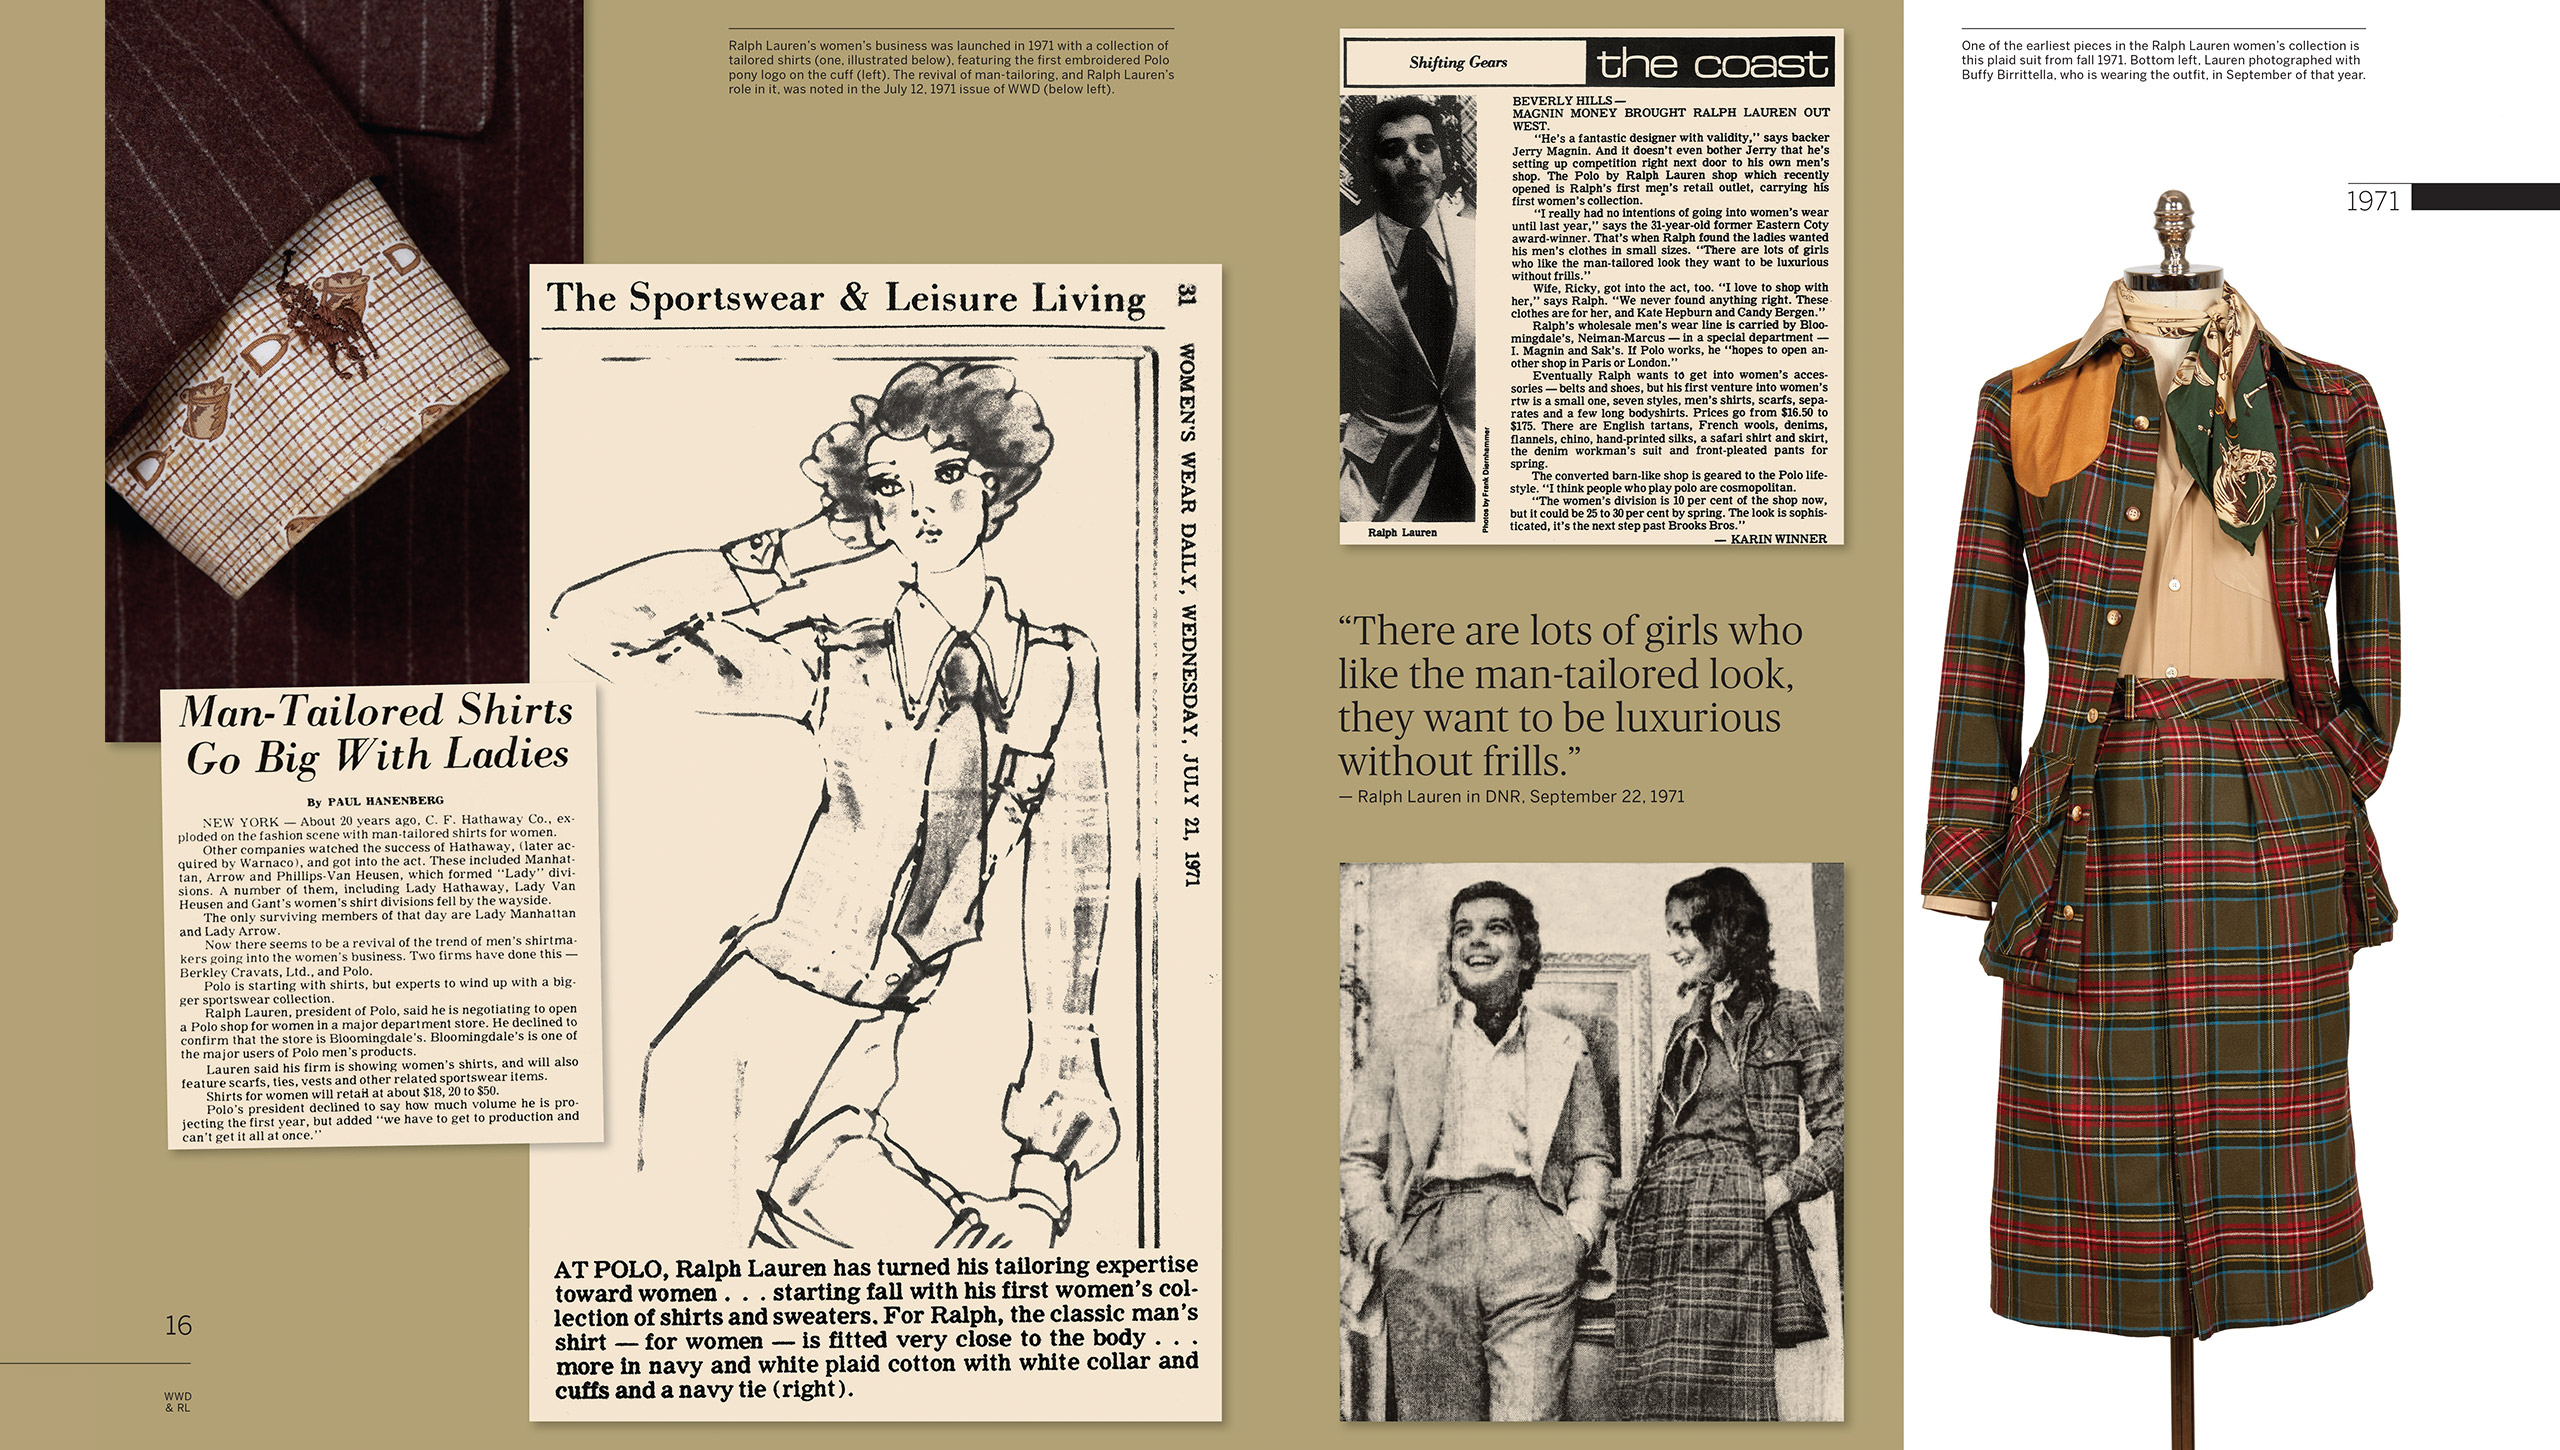 1971: With Birrittella on board, Mr. Lauren launches with first line of womenswear in the fall. Taking cues from men&#x2019;s tailoring, the closely fitted button-down shirts, tartan skirt suits, and sweaters bring the Ralph Lauren look to a whole new client base. &#x201C;They want to be luxurious without frills,&#x201D; Mr. Lauren says of women who gravitate toward his menswear-inspired aesthetic. Meanwhile, Mr. Lauren&#x2019;s vision for a retail concept comes to fruition with the opening of the first stand-alone Polo by Ralph Lauren shop on Beverly Hills&#x2019;s storied Rodeo Drive.